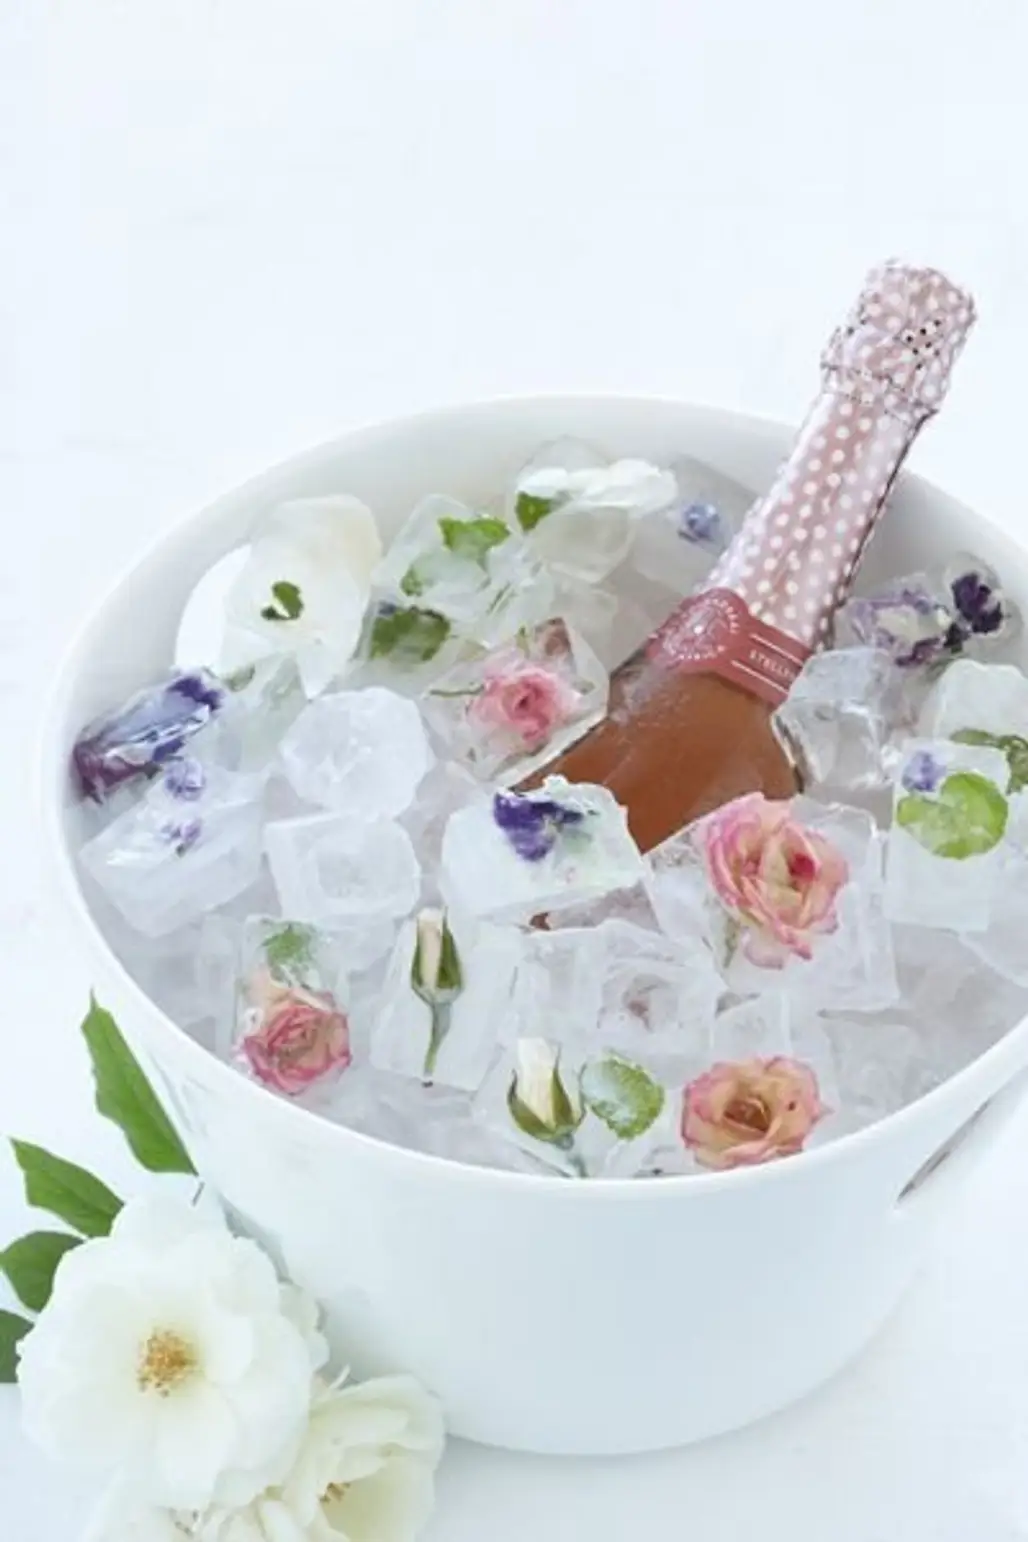 Roses Frozen in Ice Blocks to Keep the Champagne Cold